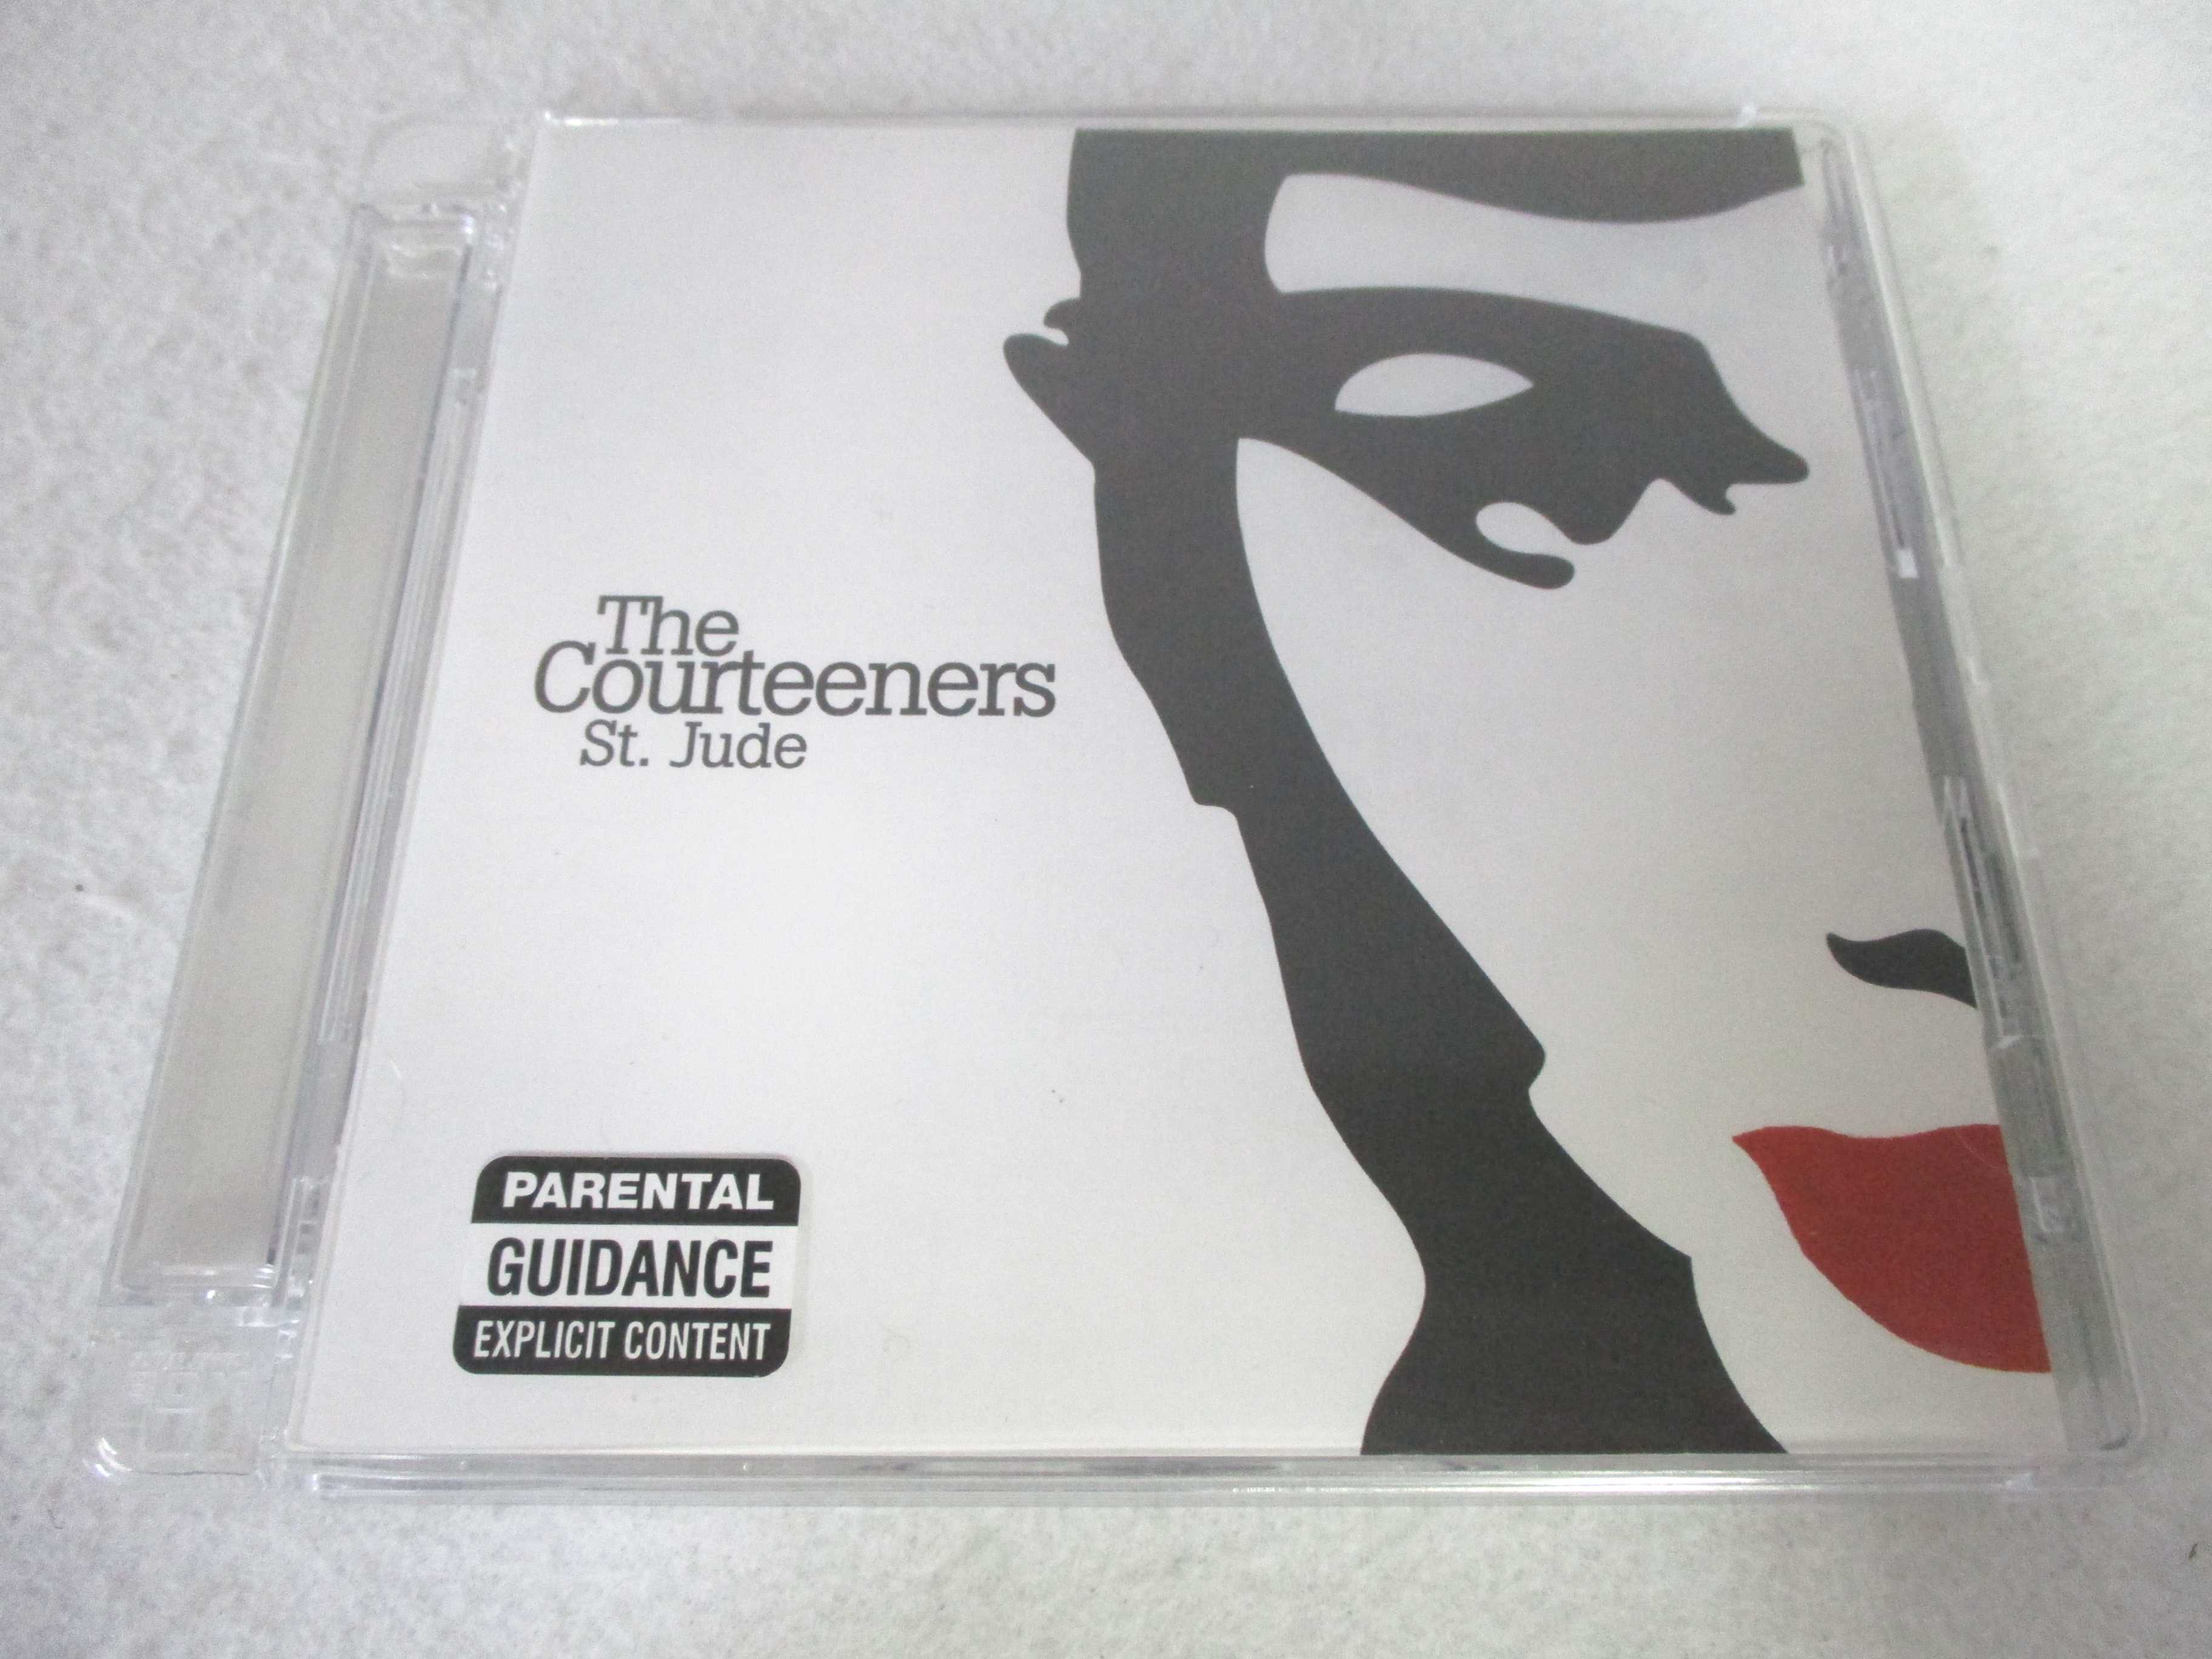 AC05332 【中古】 【CD】 St. Jude/The Courteeners